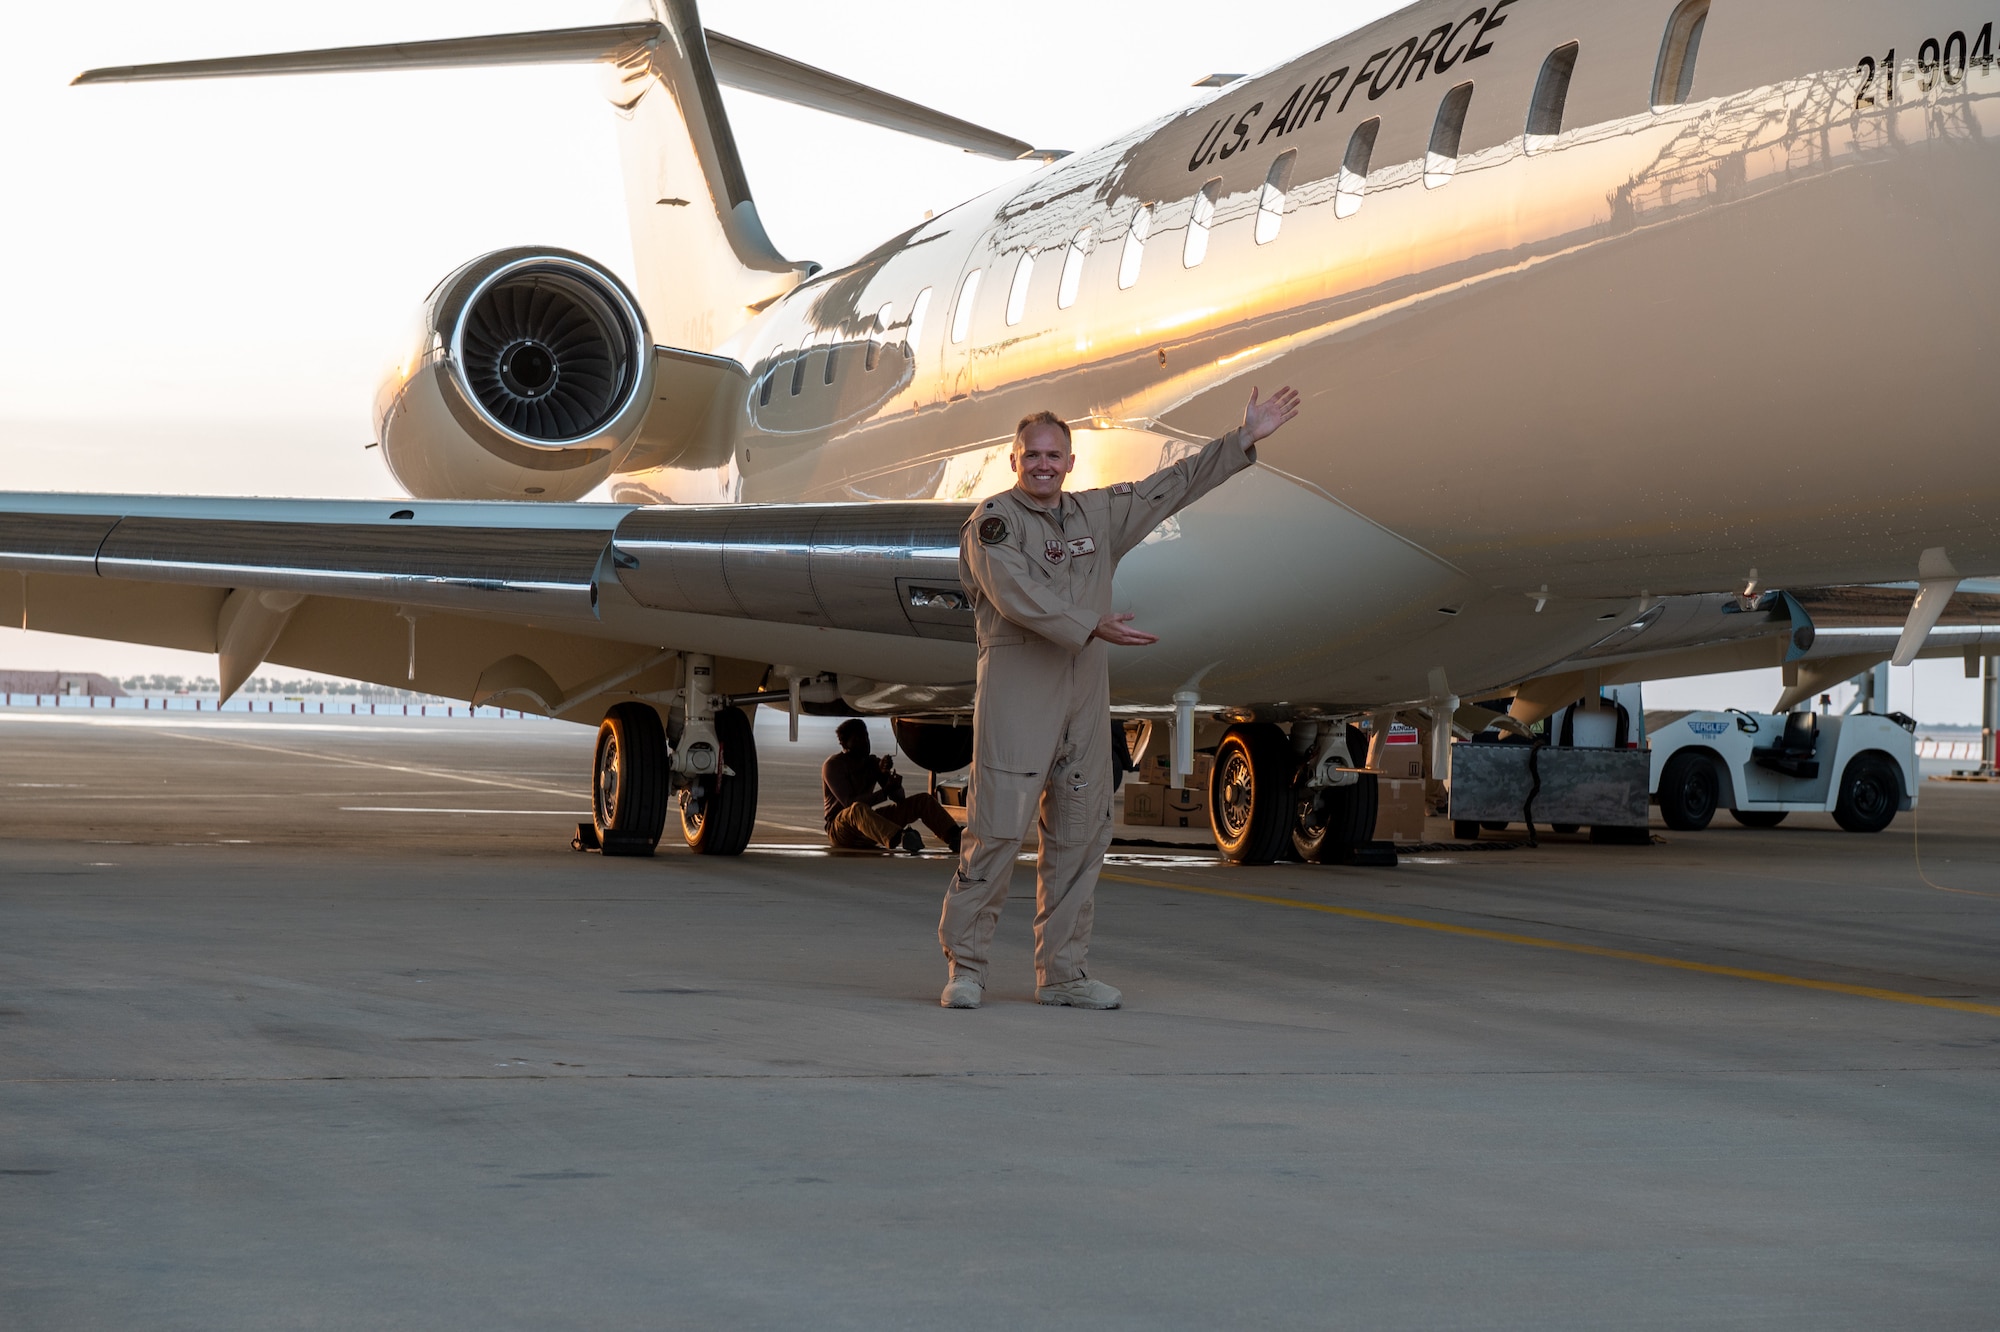 U.S. Air Force Lt. Col. Todd Arthur, the 430th Expeditionary Electronic Communications Squadron commander poses for a photo next to new U.S. Air Force E-11A BACN aircraft arrives at Prince Sultan Air Base, Kingdom of Saudi Arabia, Dec. 16, 2022.